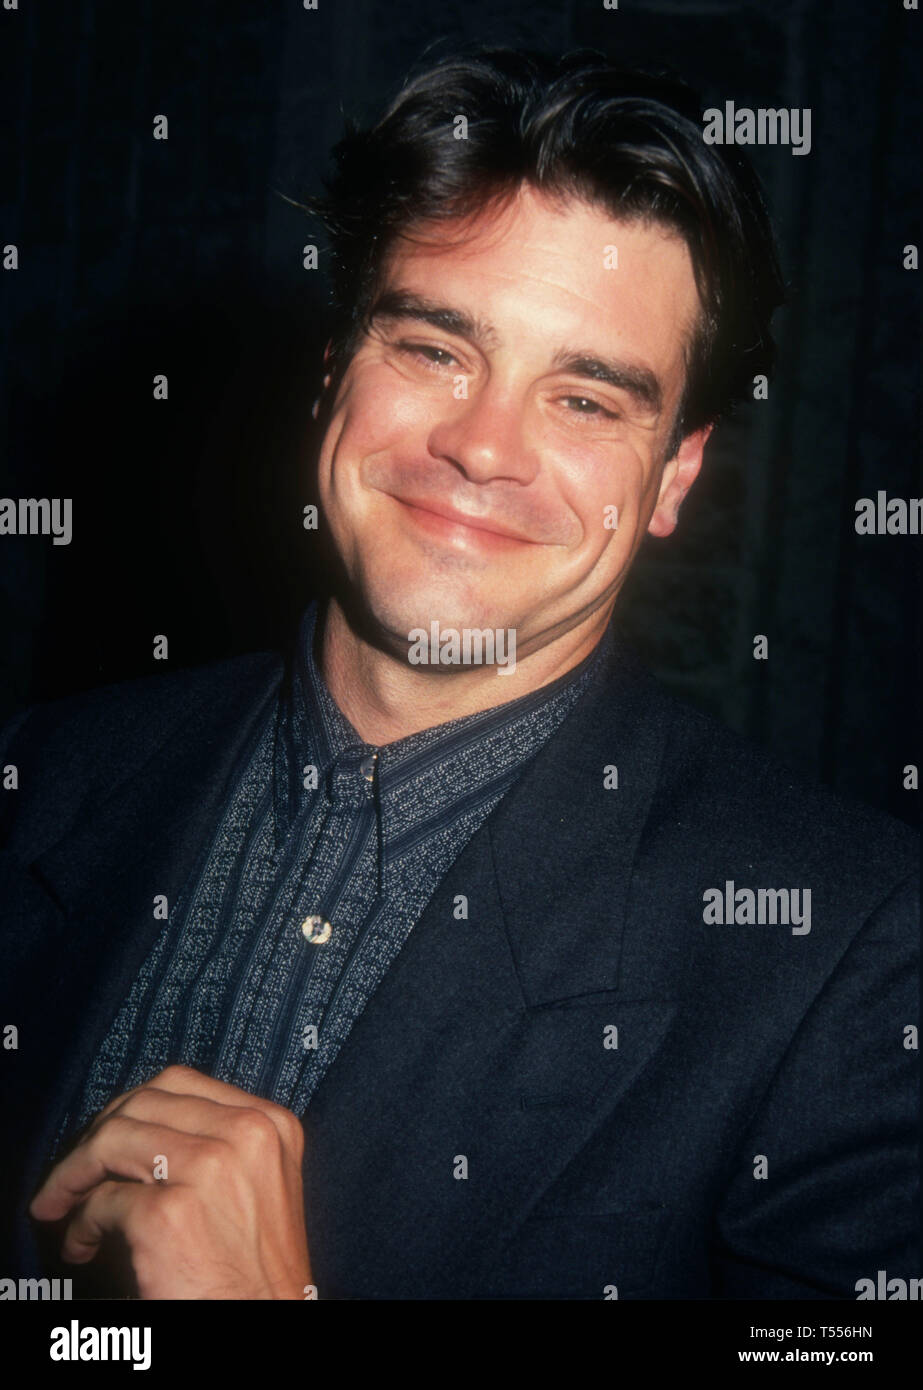 Beverly Hills, California, USA 4th April 1994  Actor Mark Arnold attends TriStar Pictures 'Threesome' Premiere on April 4, 1994 at the Academy Theatre in Beverly Hills, California, USA. Photo by Barry King/Alamy Stock Photo Stock Photo